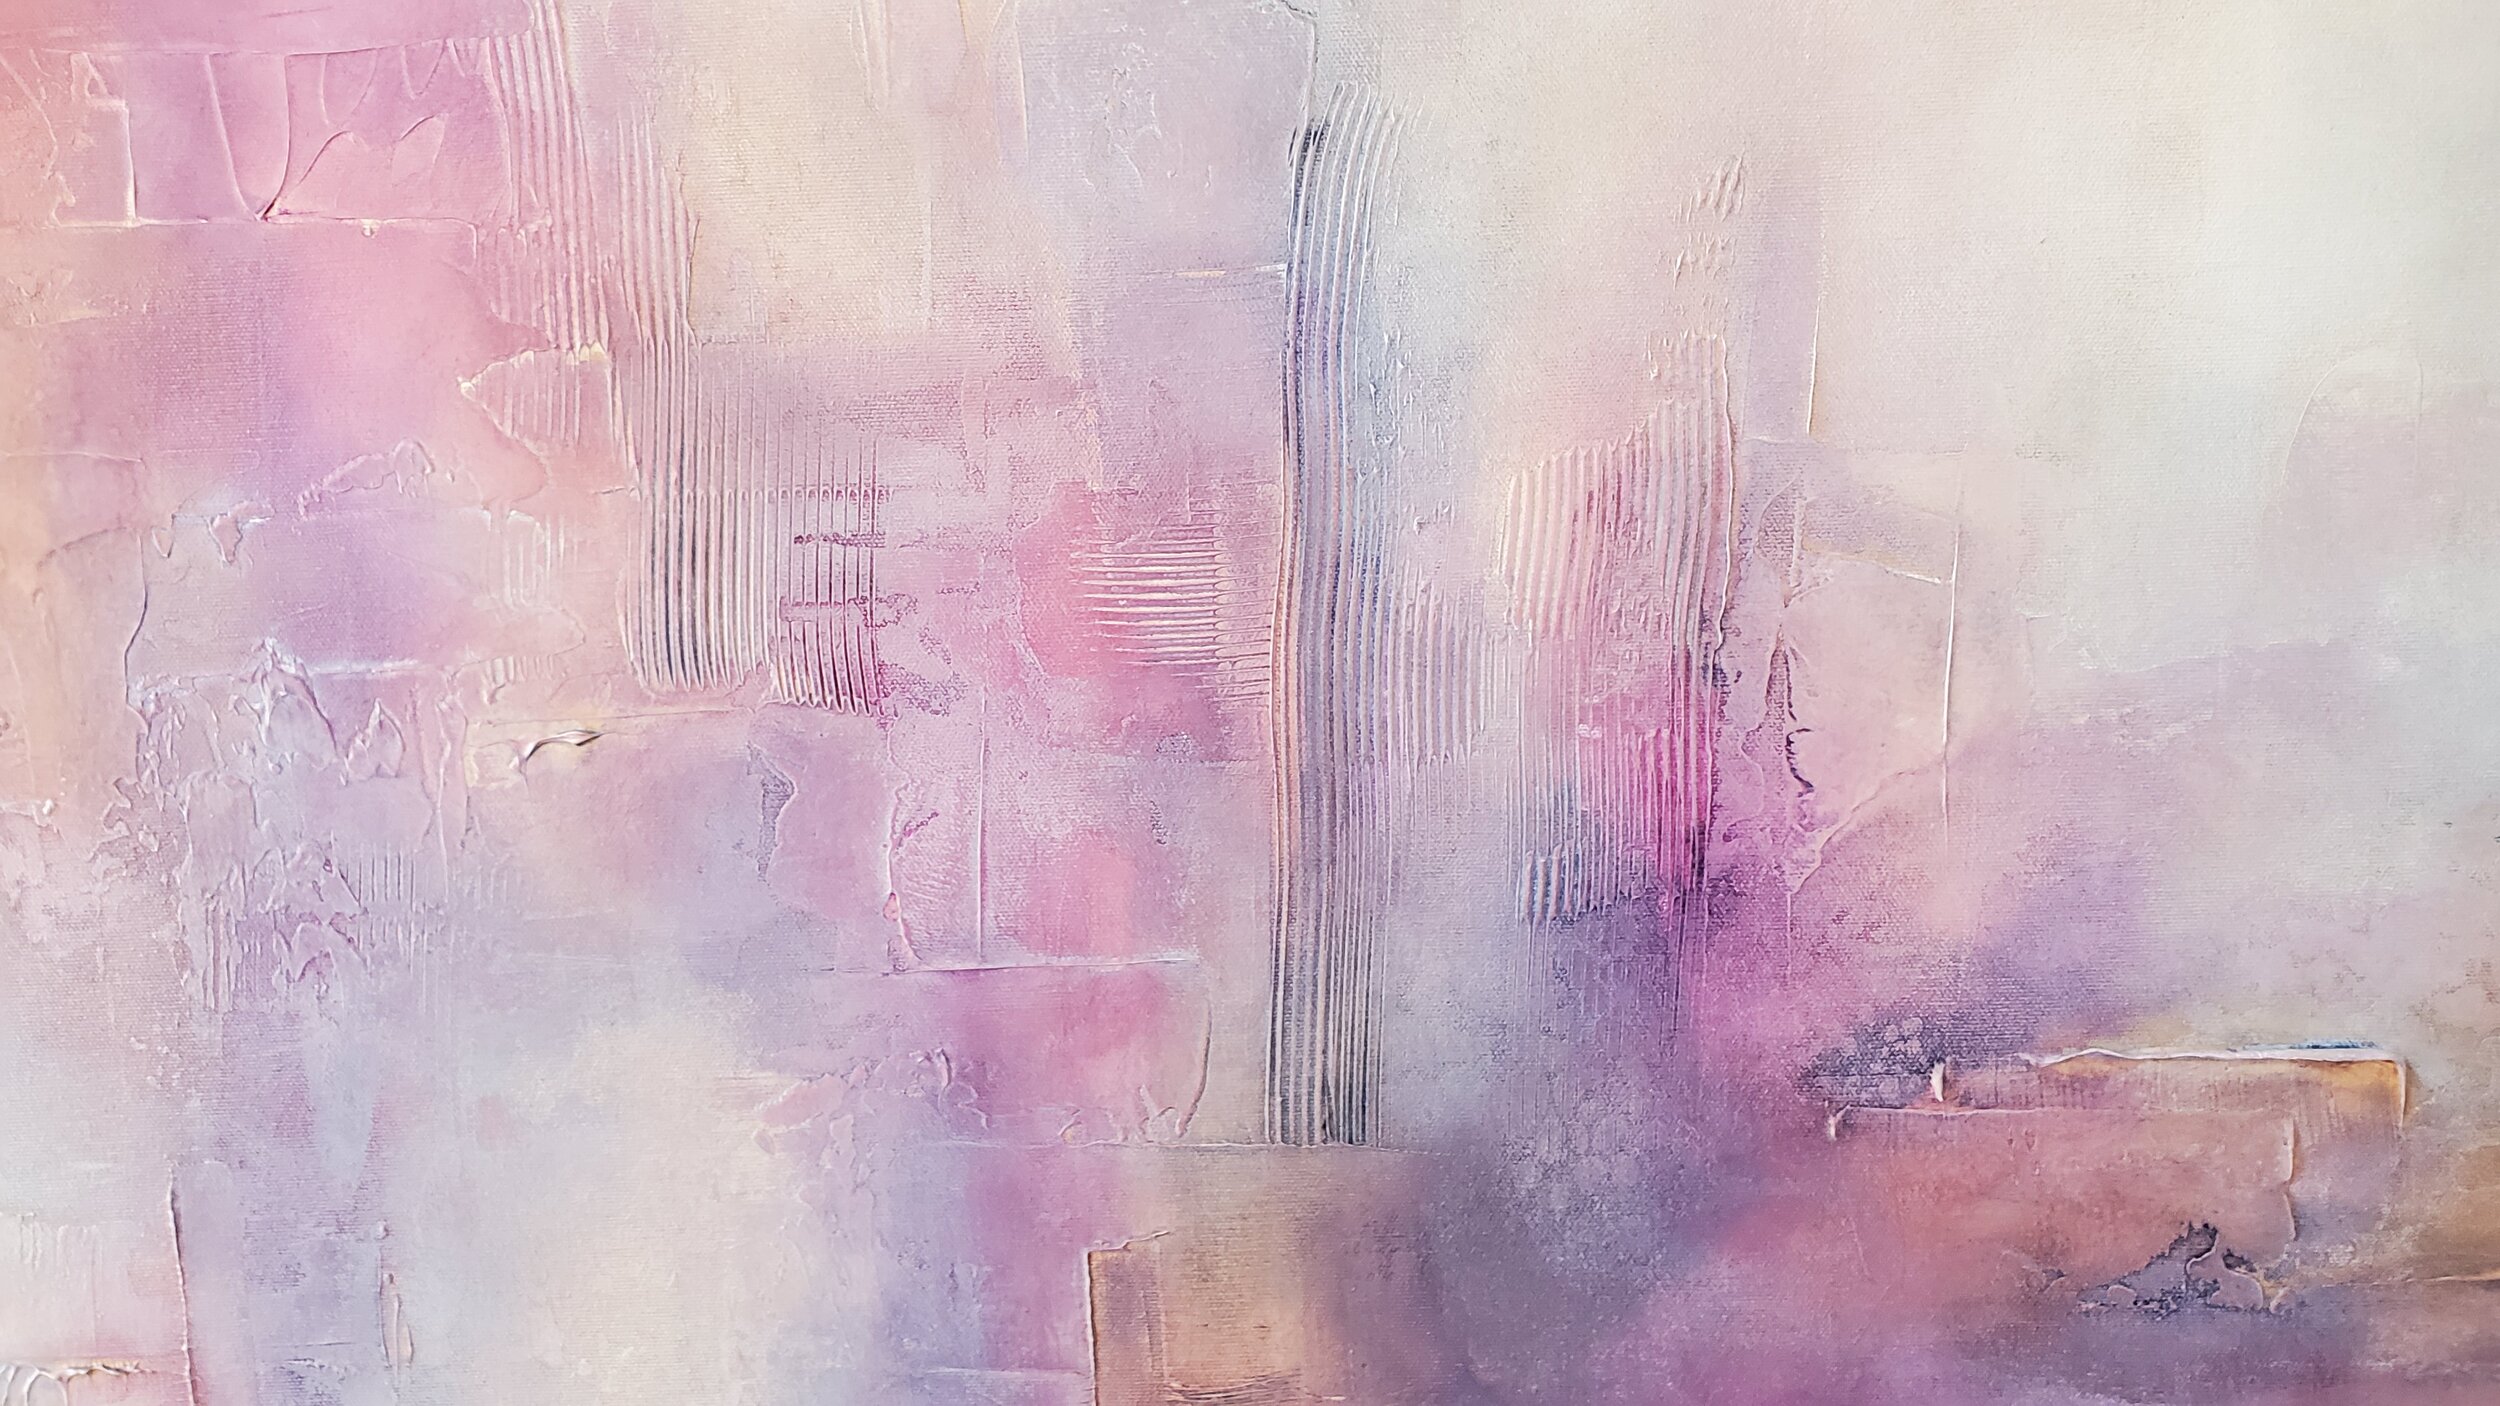  Painting #9 Help - Vancouver abstract painter, Donna Giraud has eleven new available artworks for sale in her 2020 solo art exhibition titled, Lost and Found. Her large scale, abstract, textural artworks are perfect for any interior design aesthetic